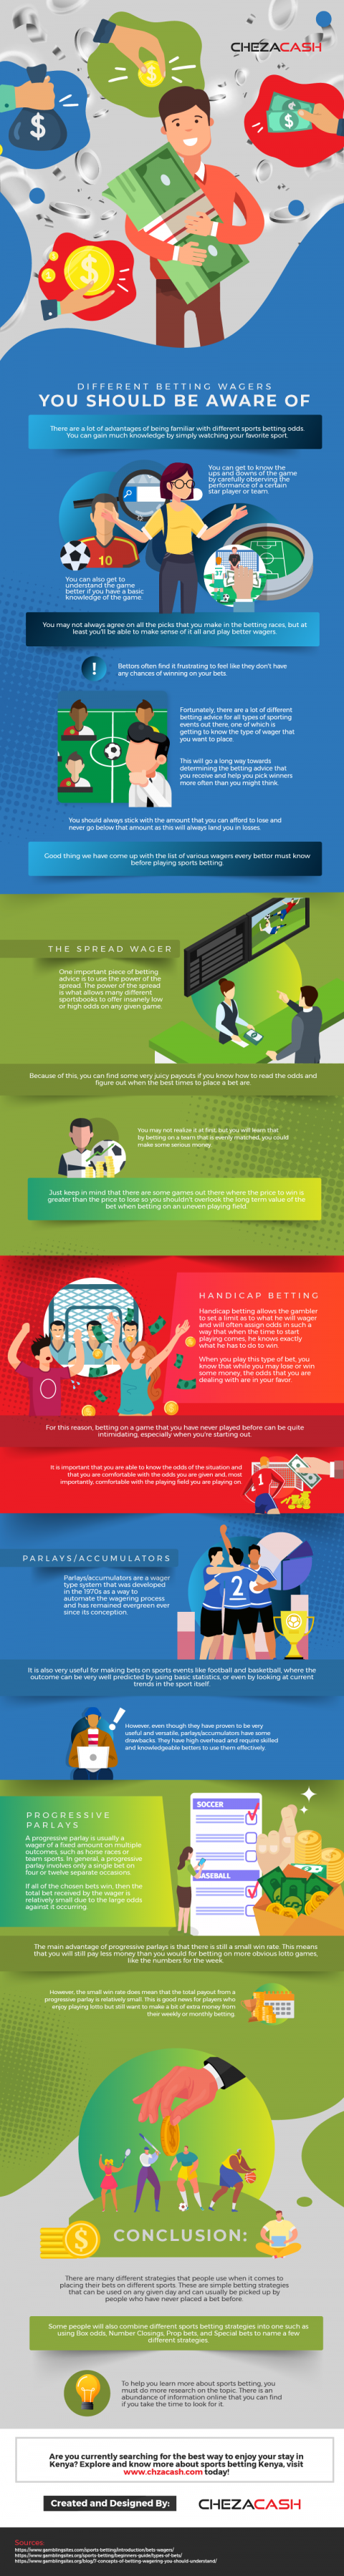 Different-Betting-Wagers-You-Should-Be-Aware-Of-Infographic